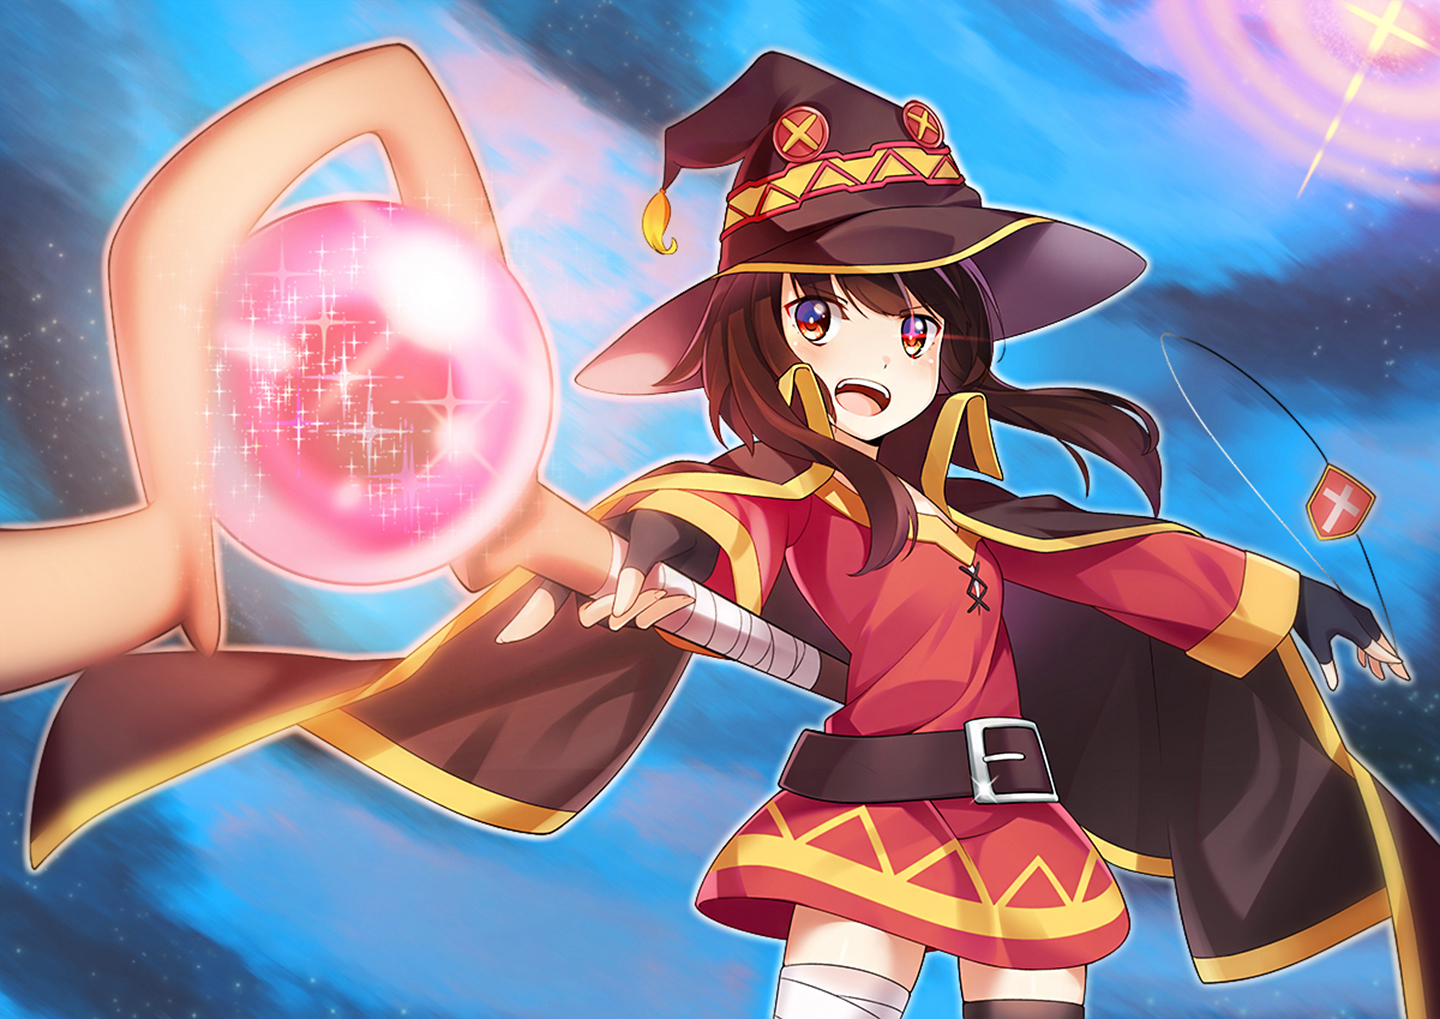 KonoSuba – God’s Blessing On This Wonderful World!! Backgrounds, Compatible - PC, Mobile, Gadgets| 1440x1019 px